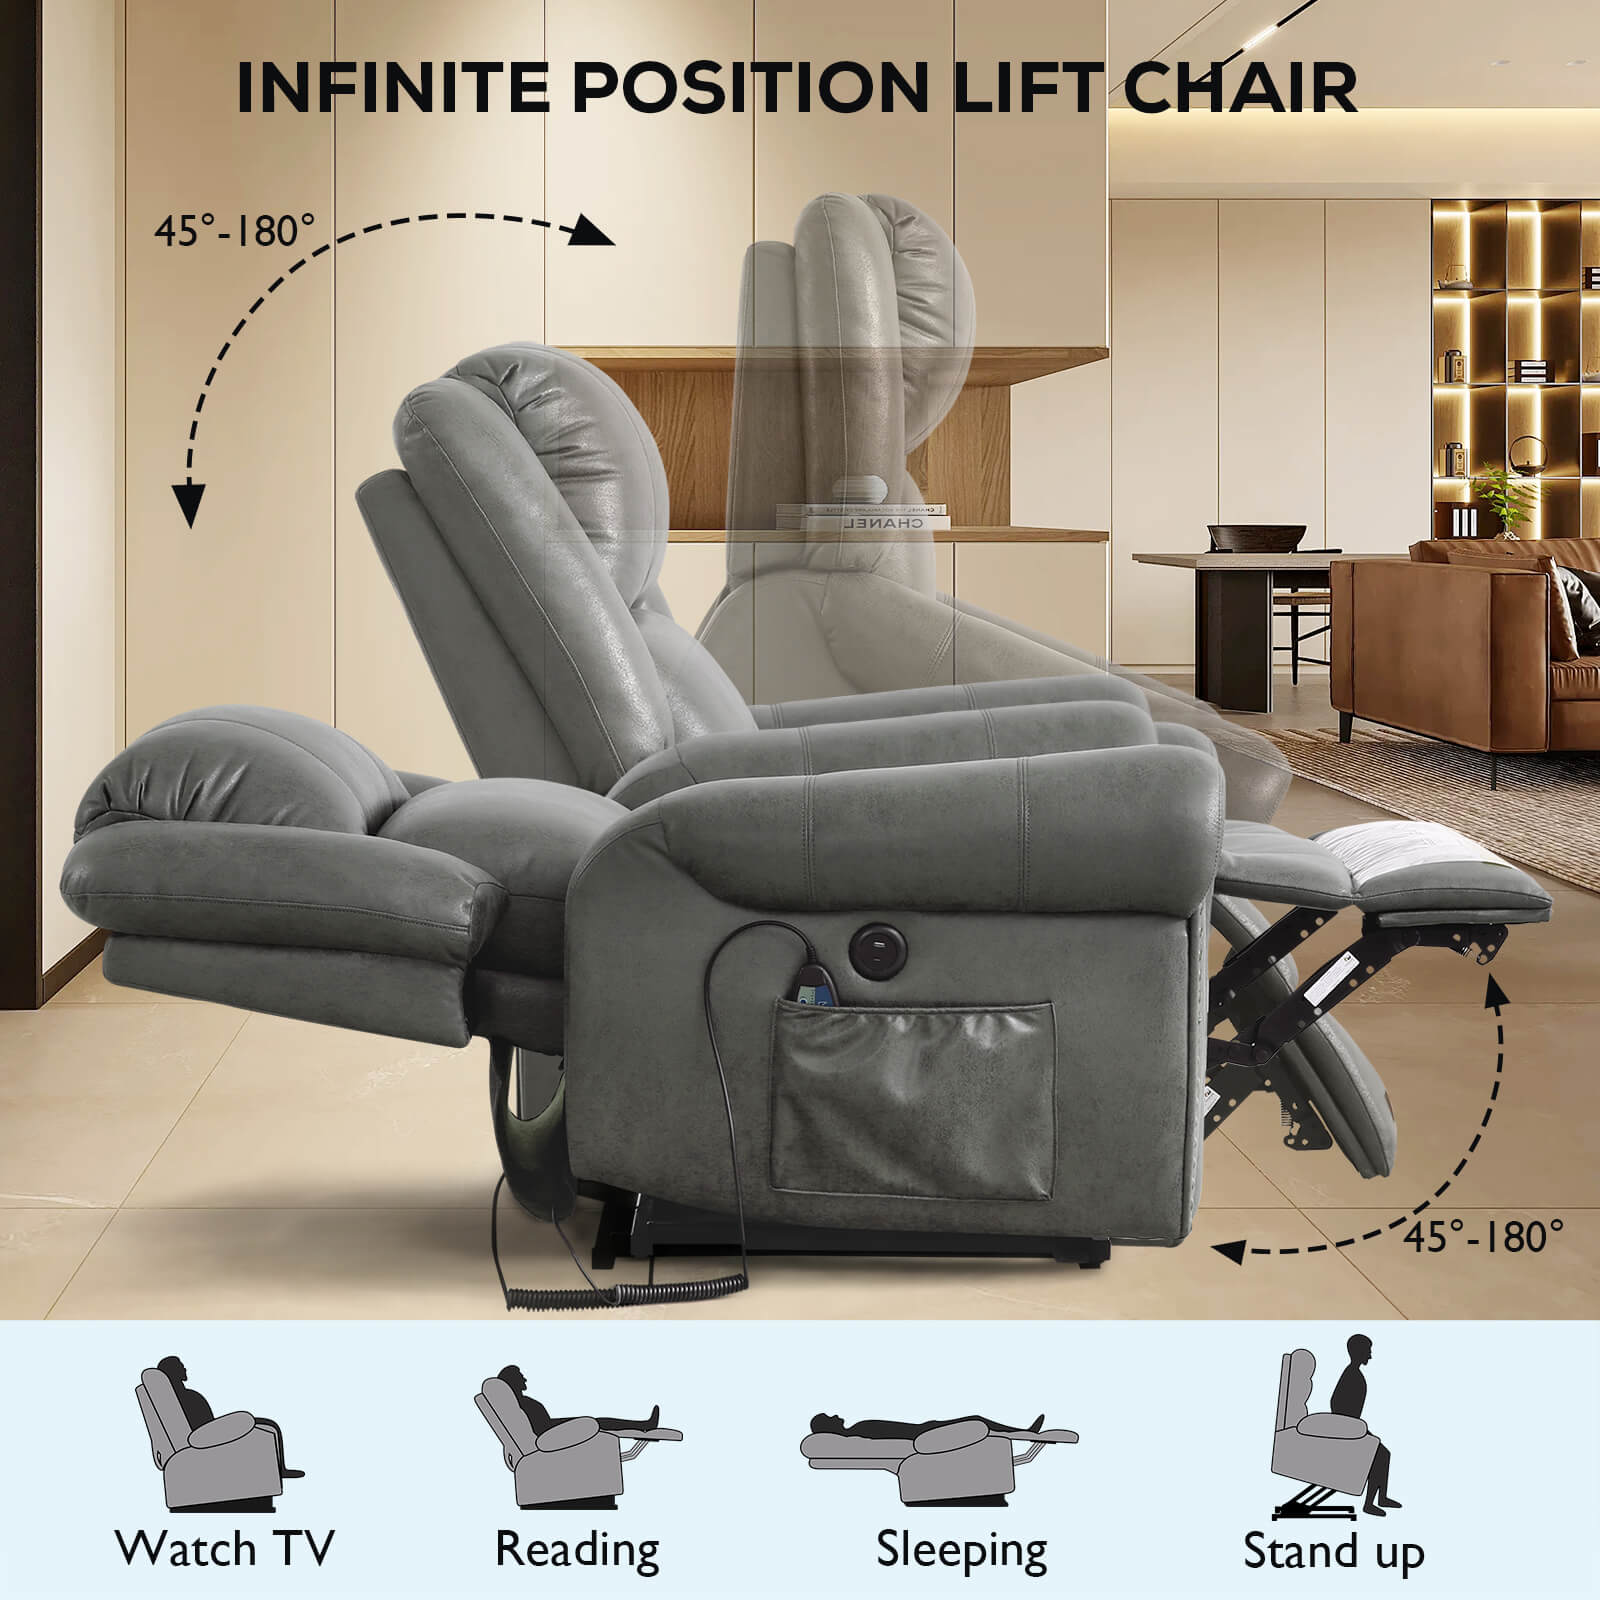 Soulout Infinite Position Lift Recliner Chairs